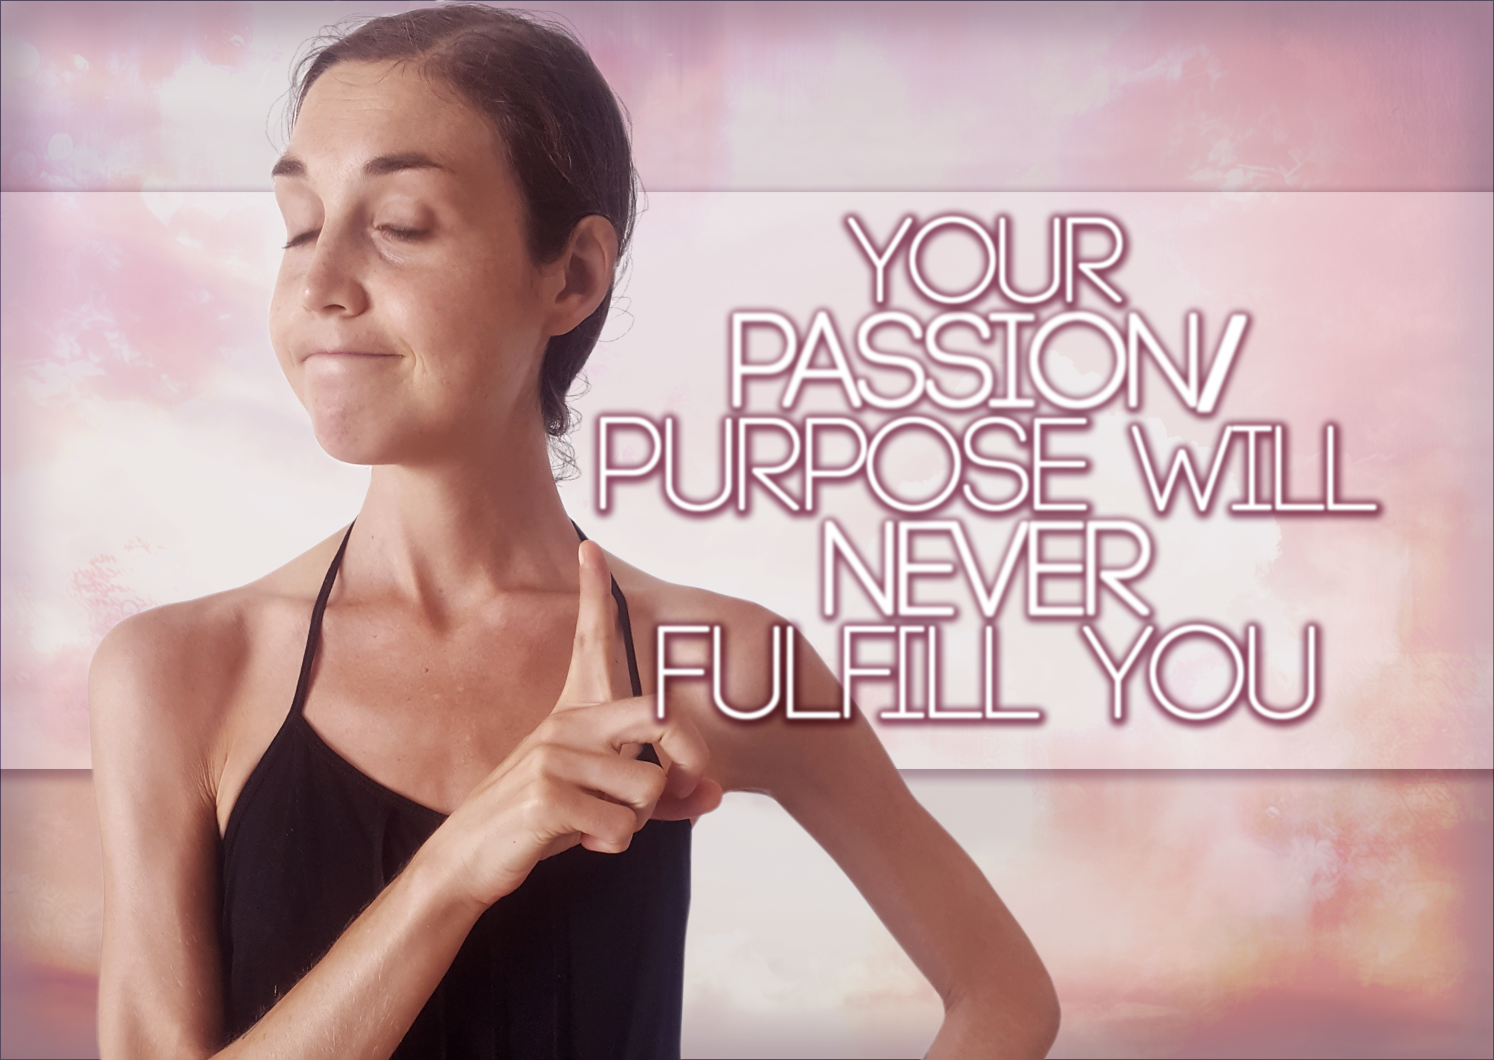 Your Passion/Purpose Will Never Fulfill You